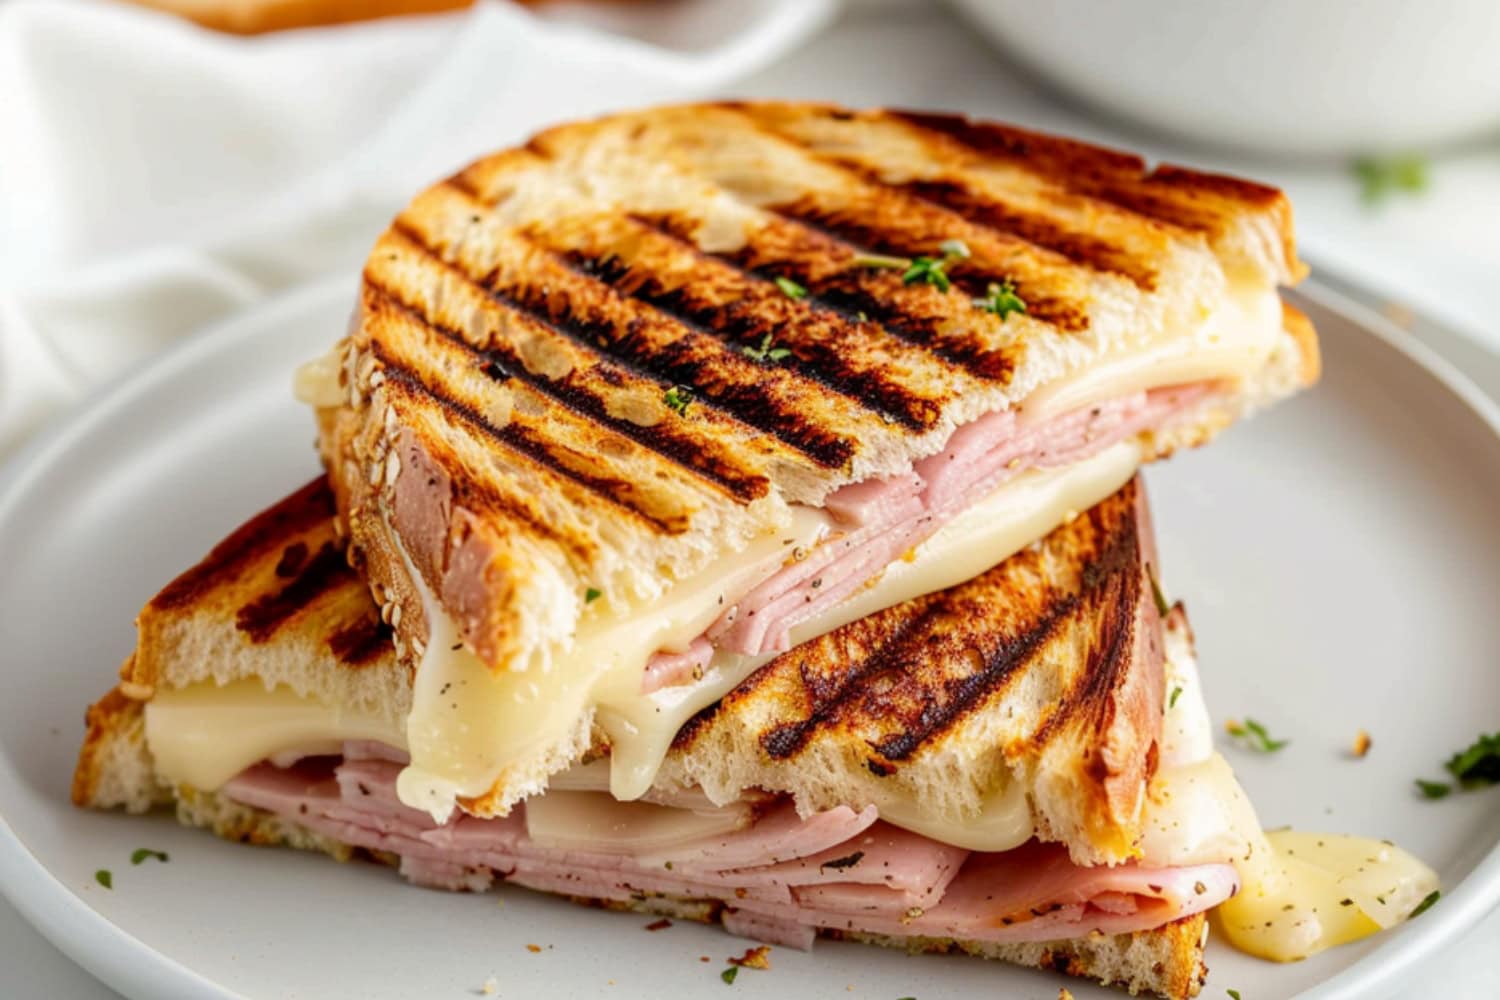 Panini press with Swiss cheese, tender ham, softened butter and tangy mustard.